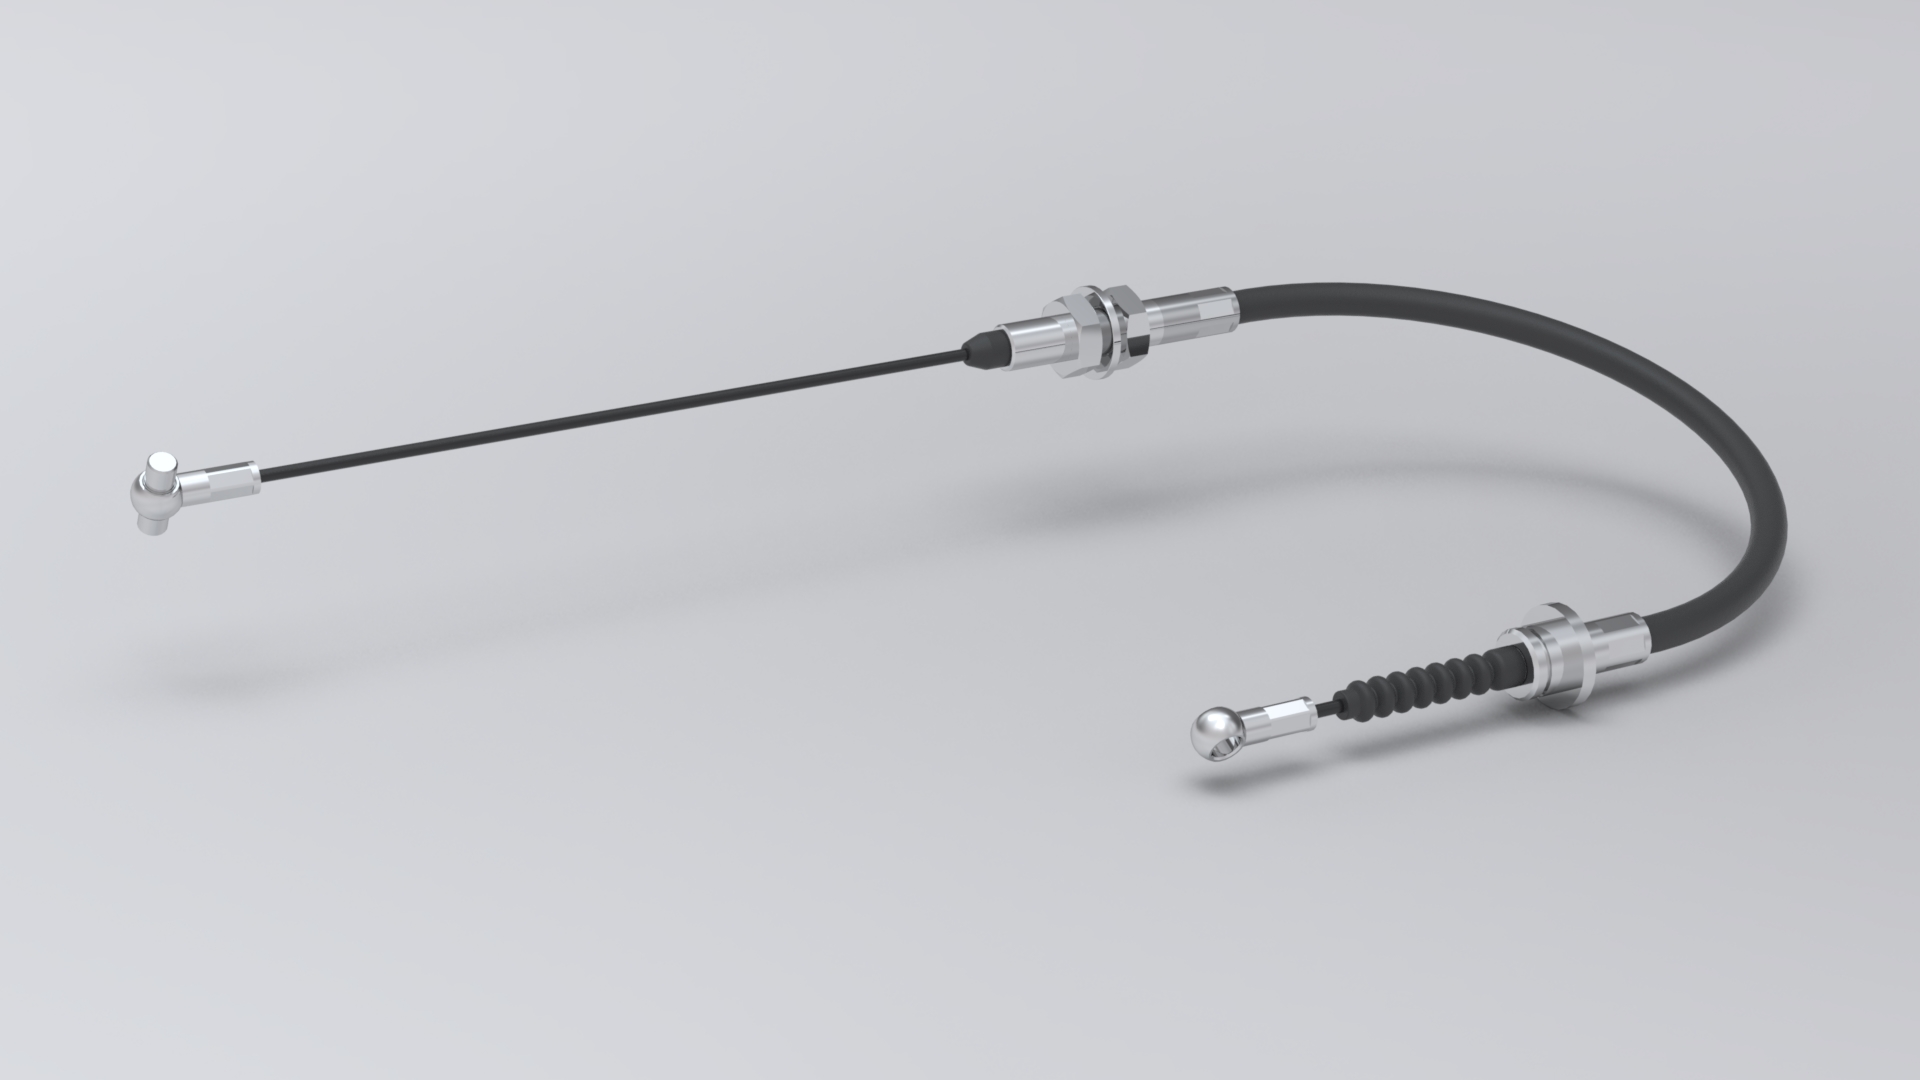 Hand Brake Cable